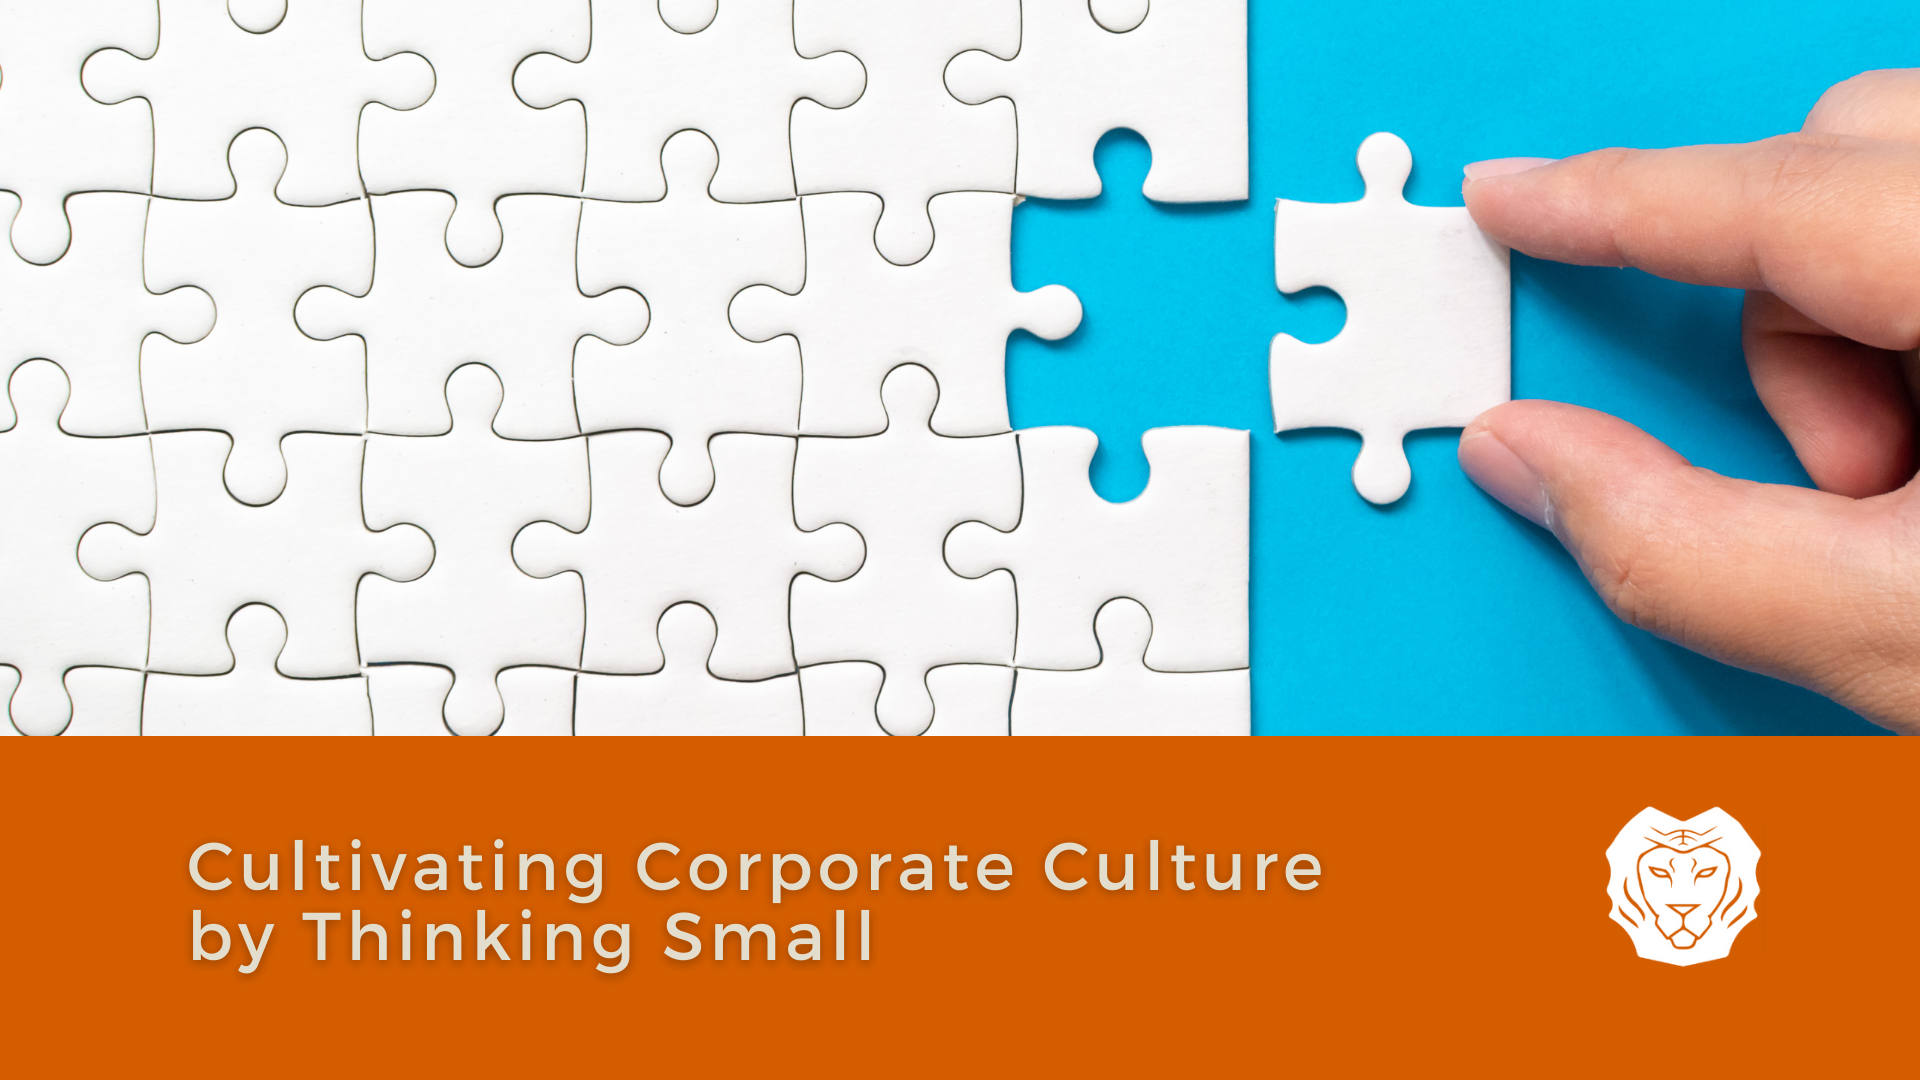 Cultivating Corporate Culture by Thinking Small